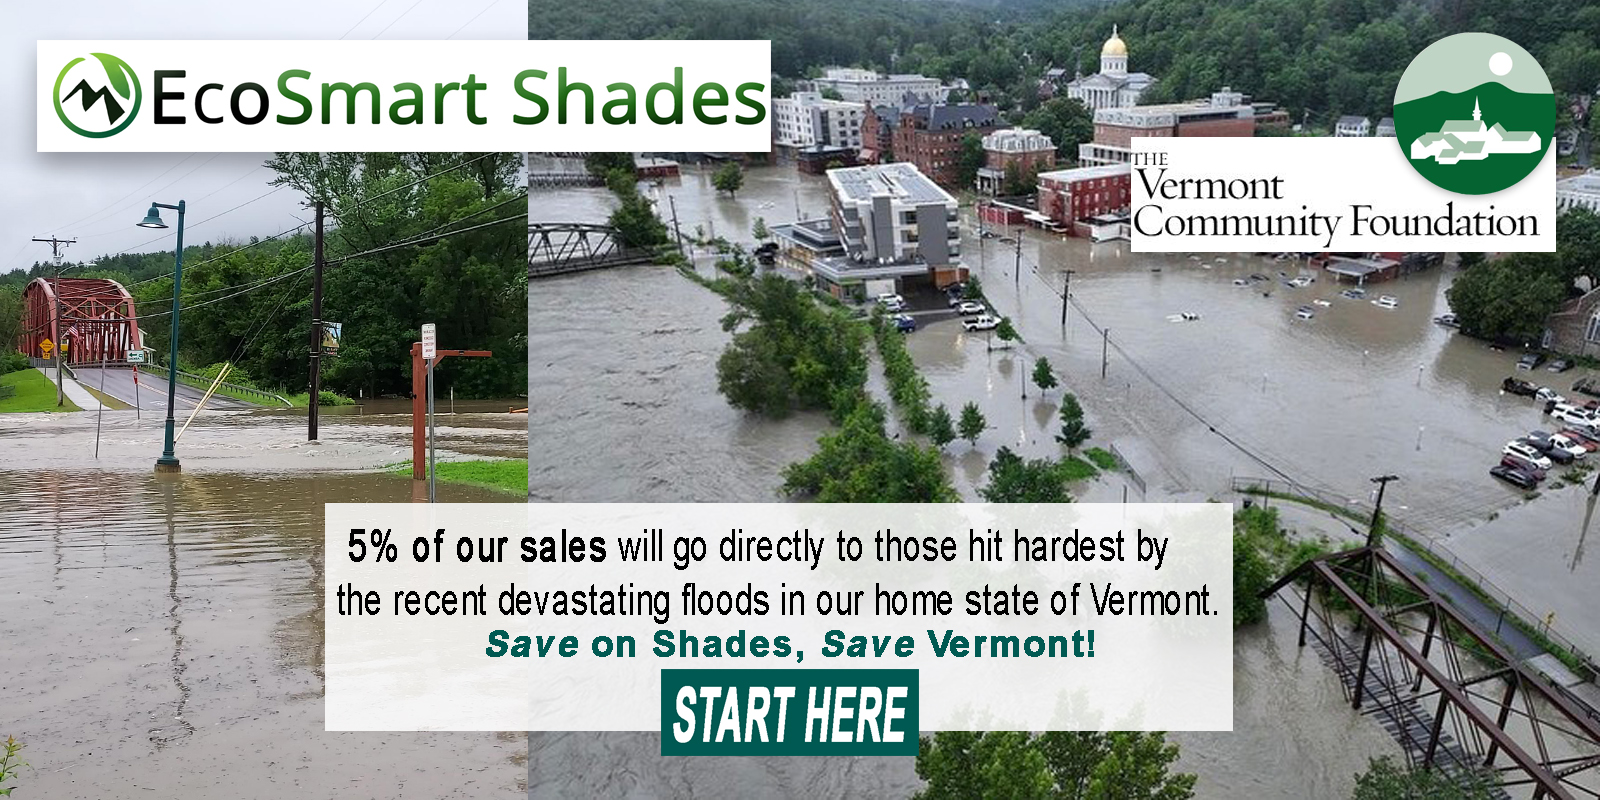 EcoSmart Shades is donating 5% of sales to help the victims of flood damage in Vermont.